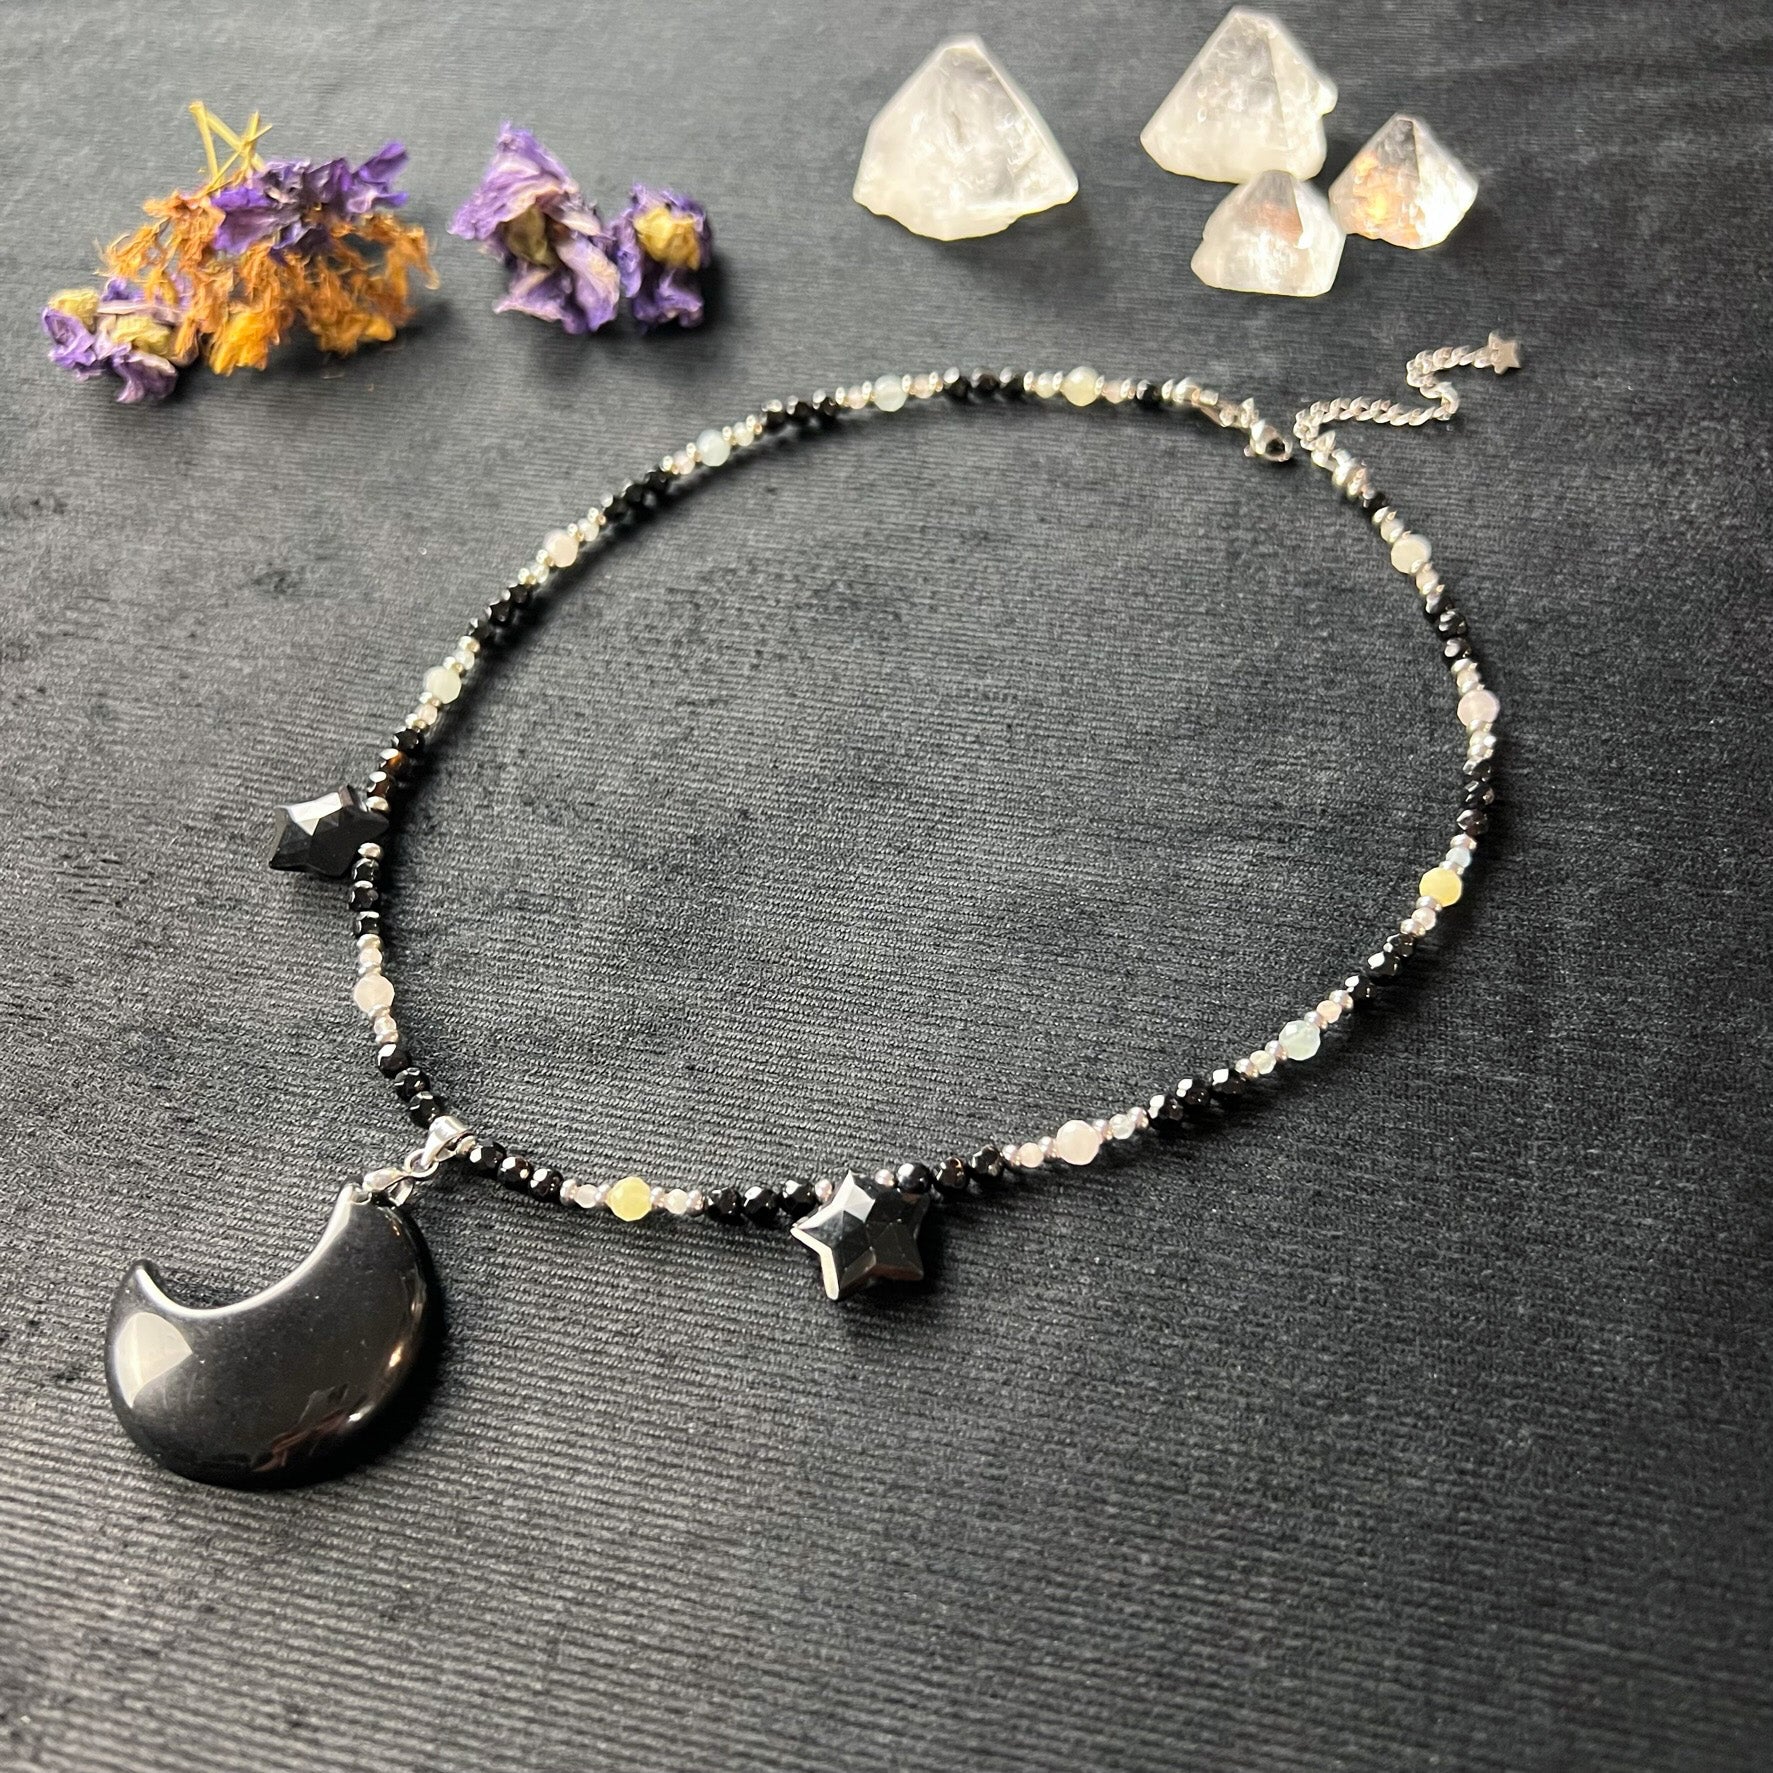 Gemstone moon and stars necklace obsidian morganite onyx and stainless steel beaded necklace Rêveries Collection gift for her